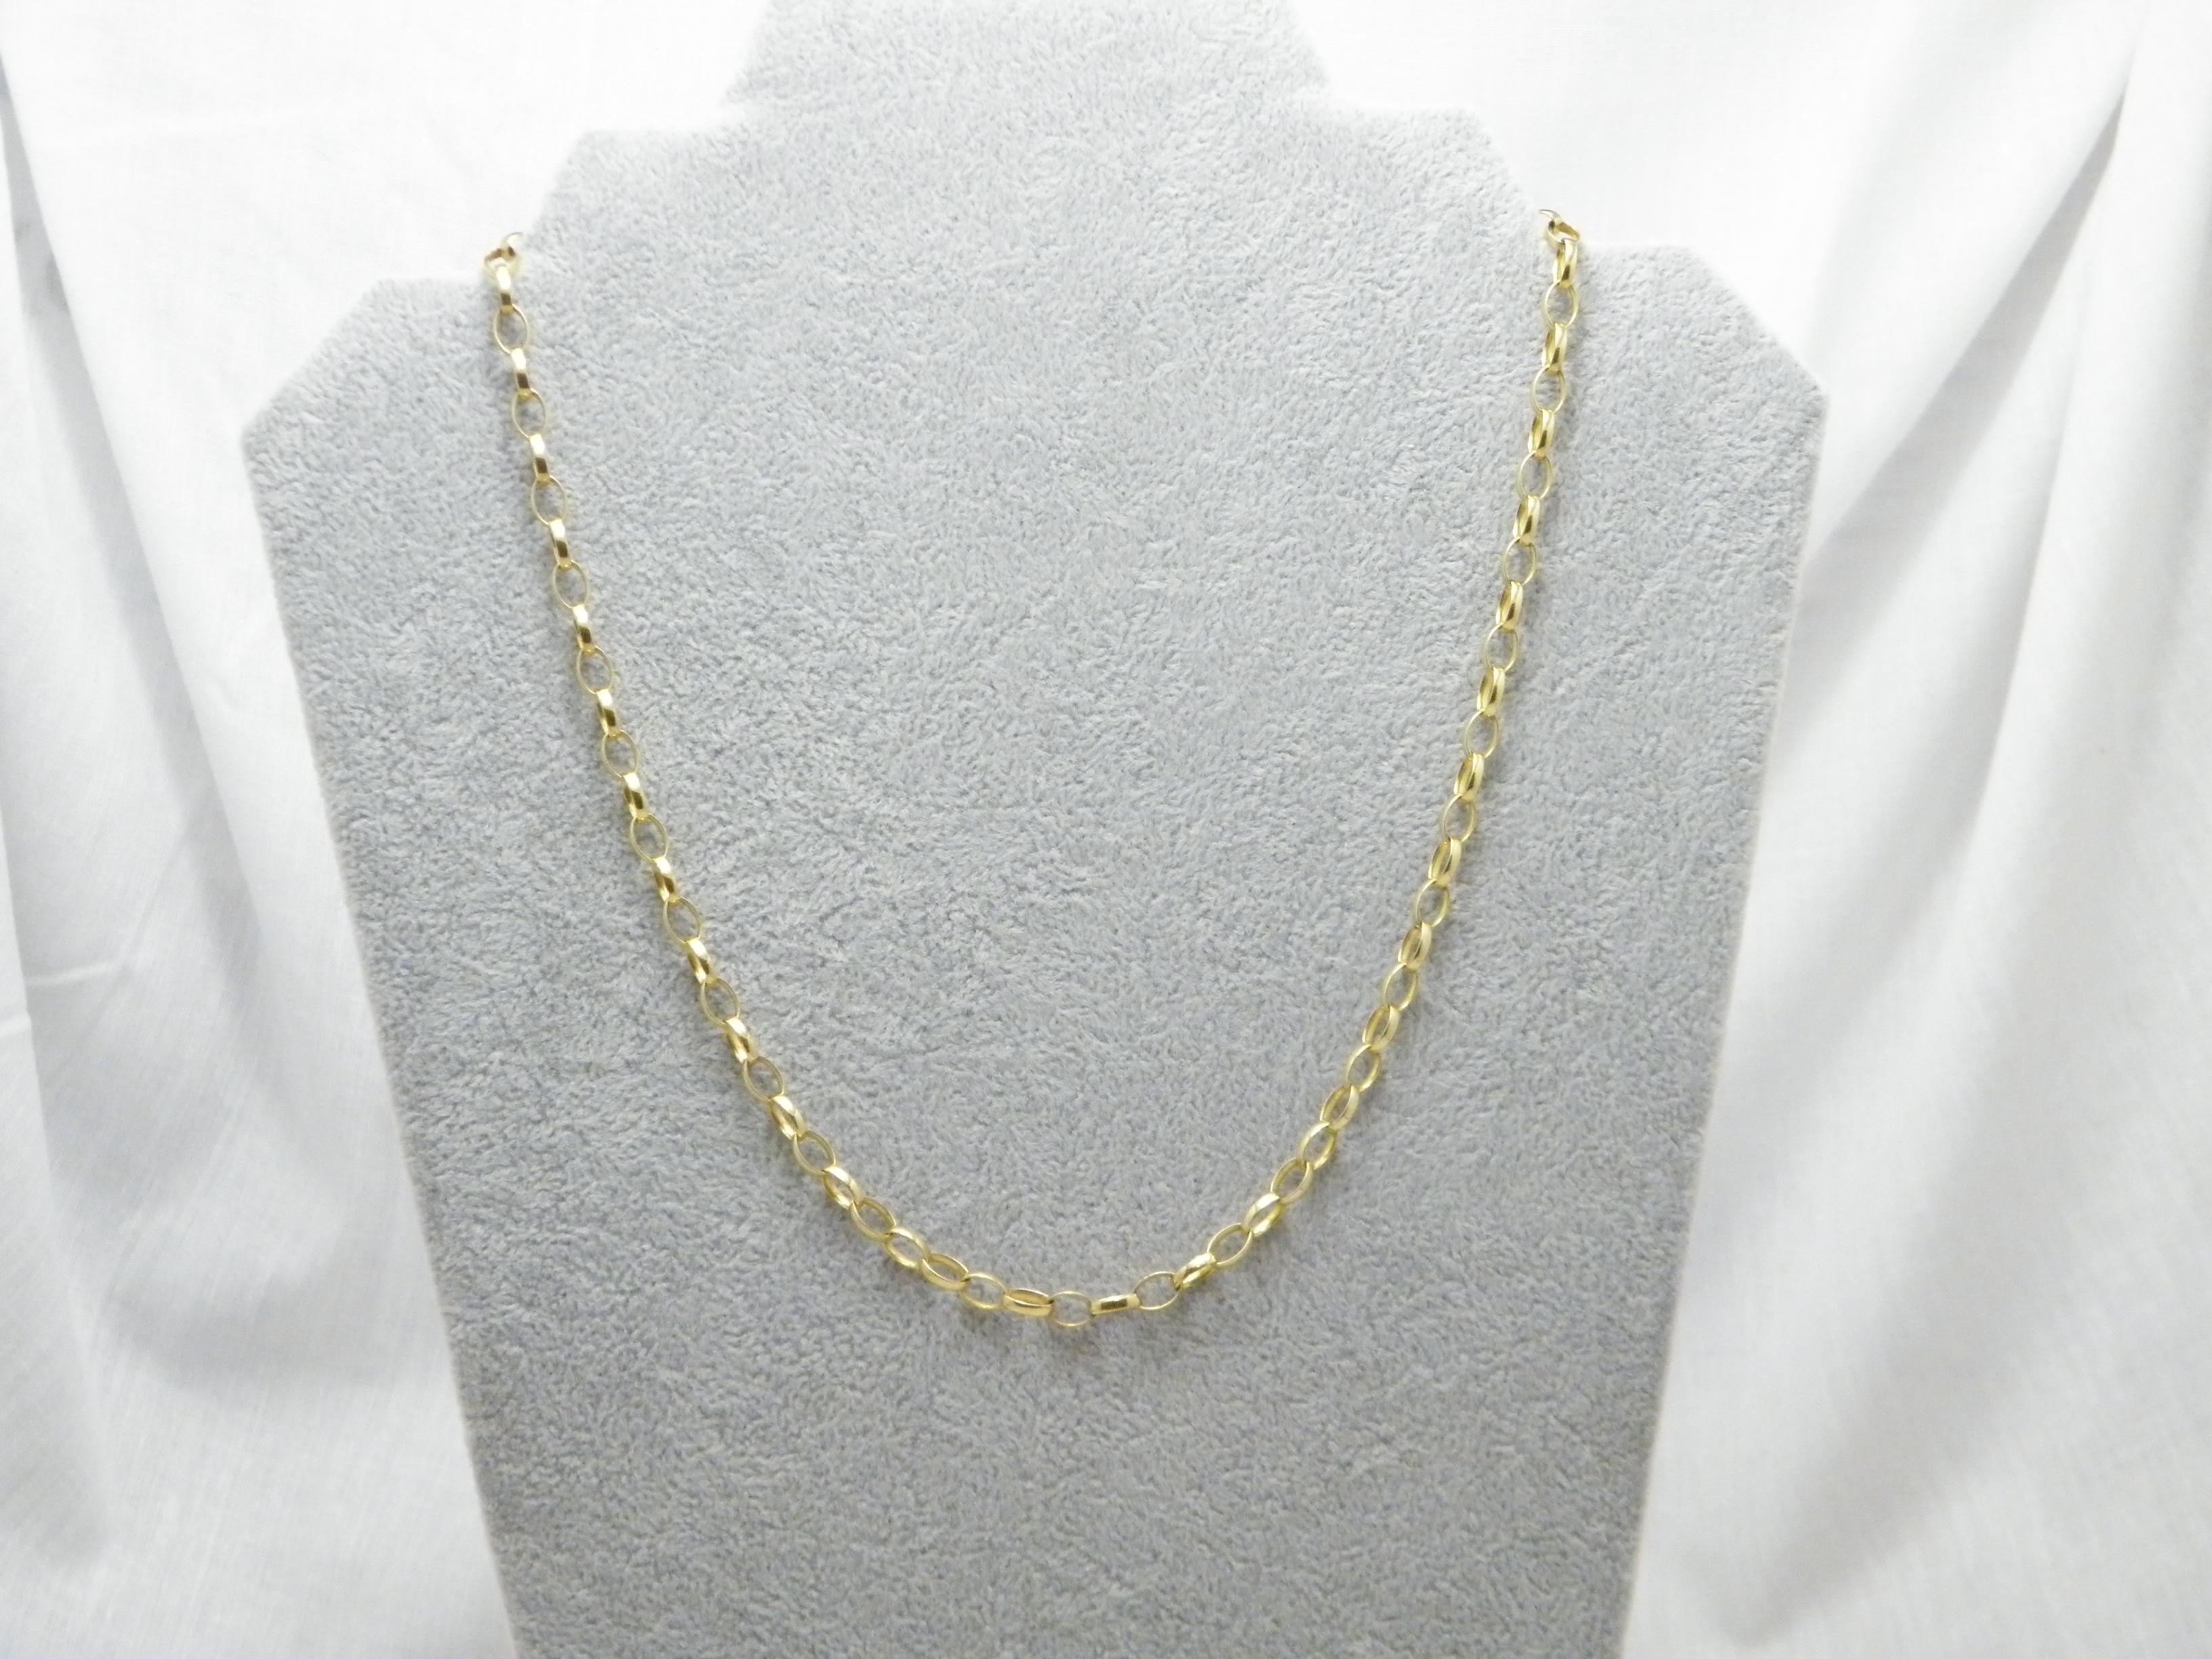 Contemporary Vintage 9ct Gold Heavy Oval Belcher Necklace 20 Inch Chain 375 Purity 13.2g For Sale